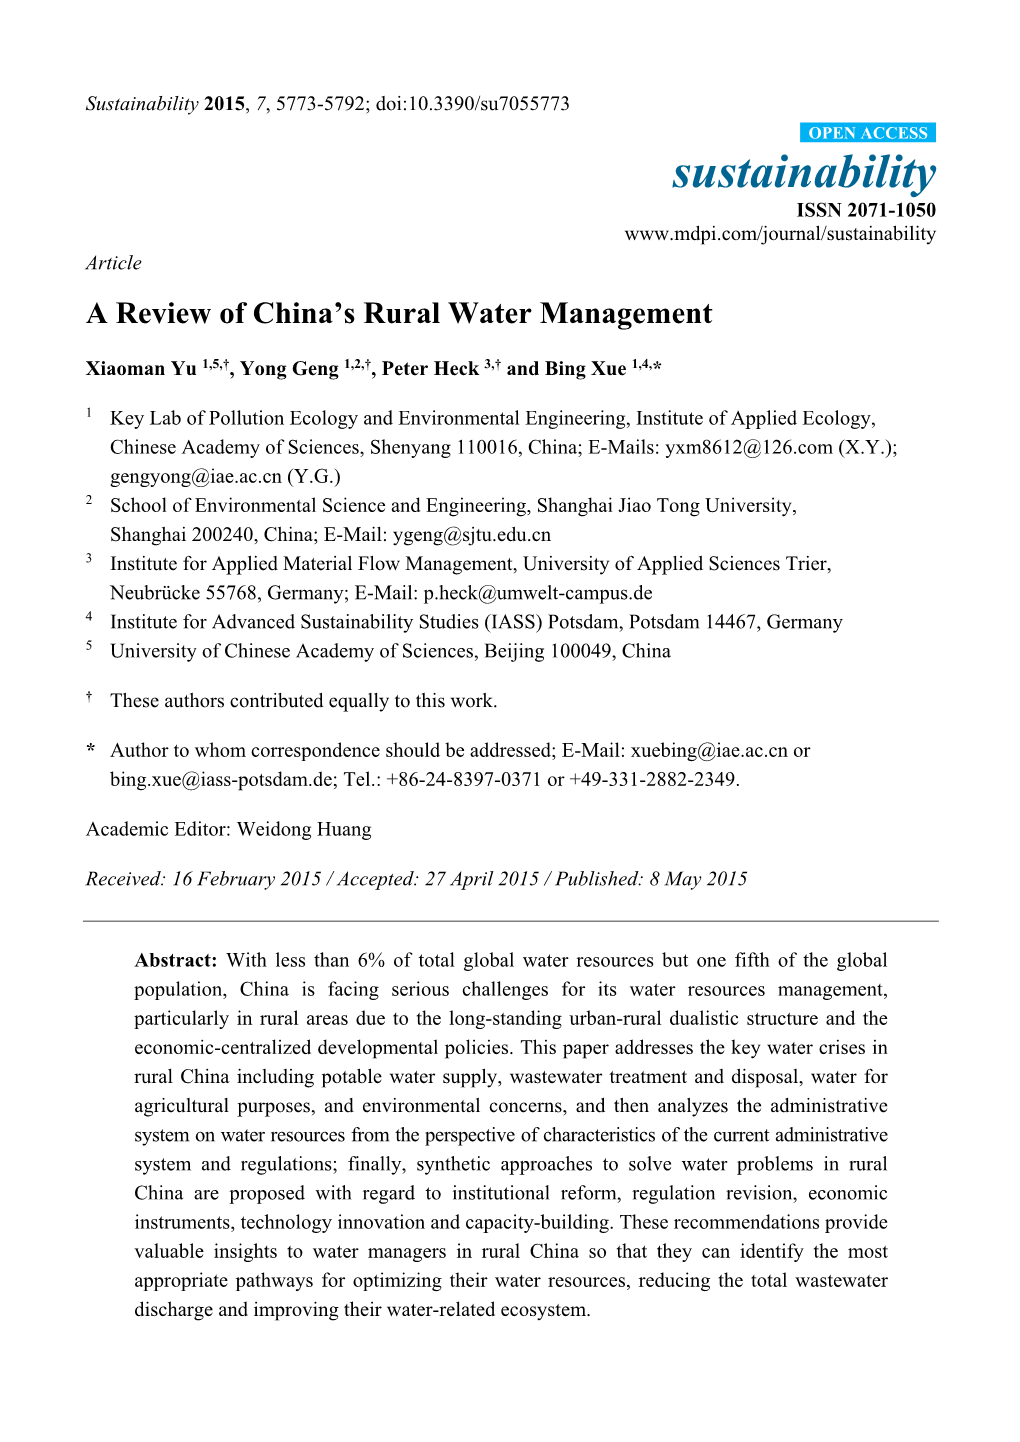 A Review of China's Rural Water Management